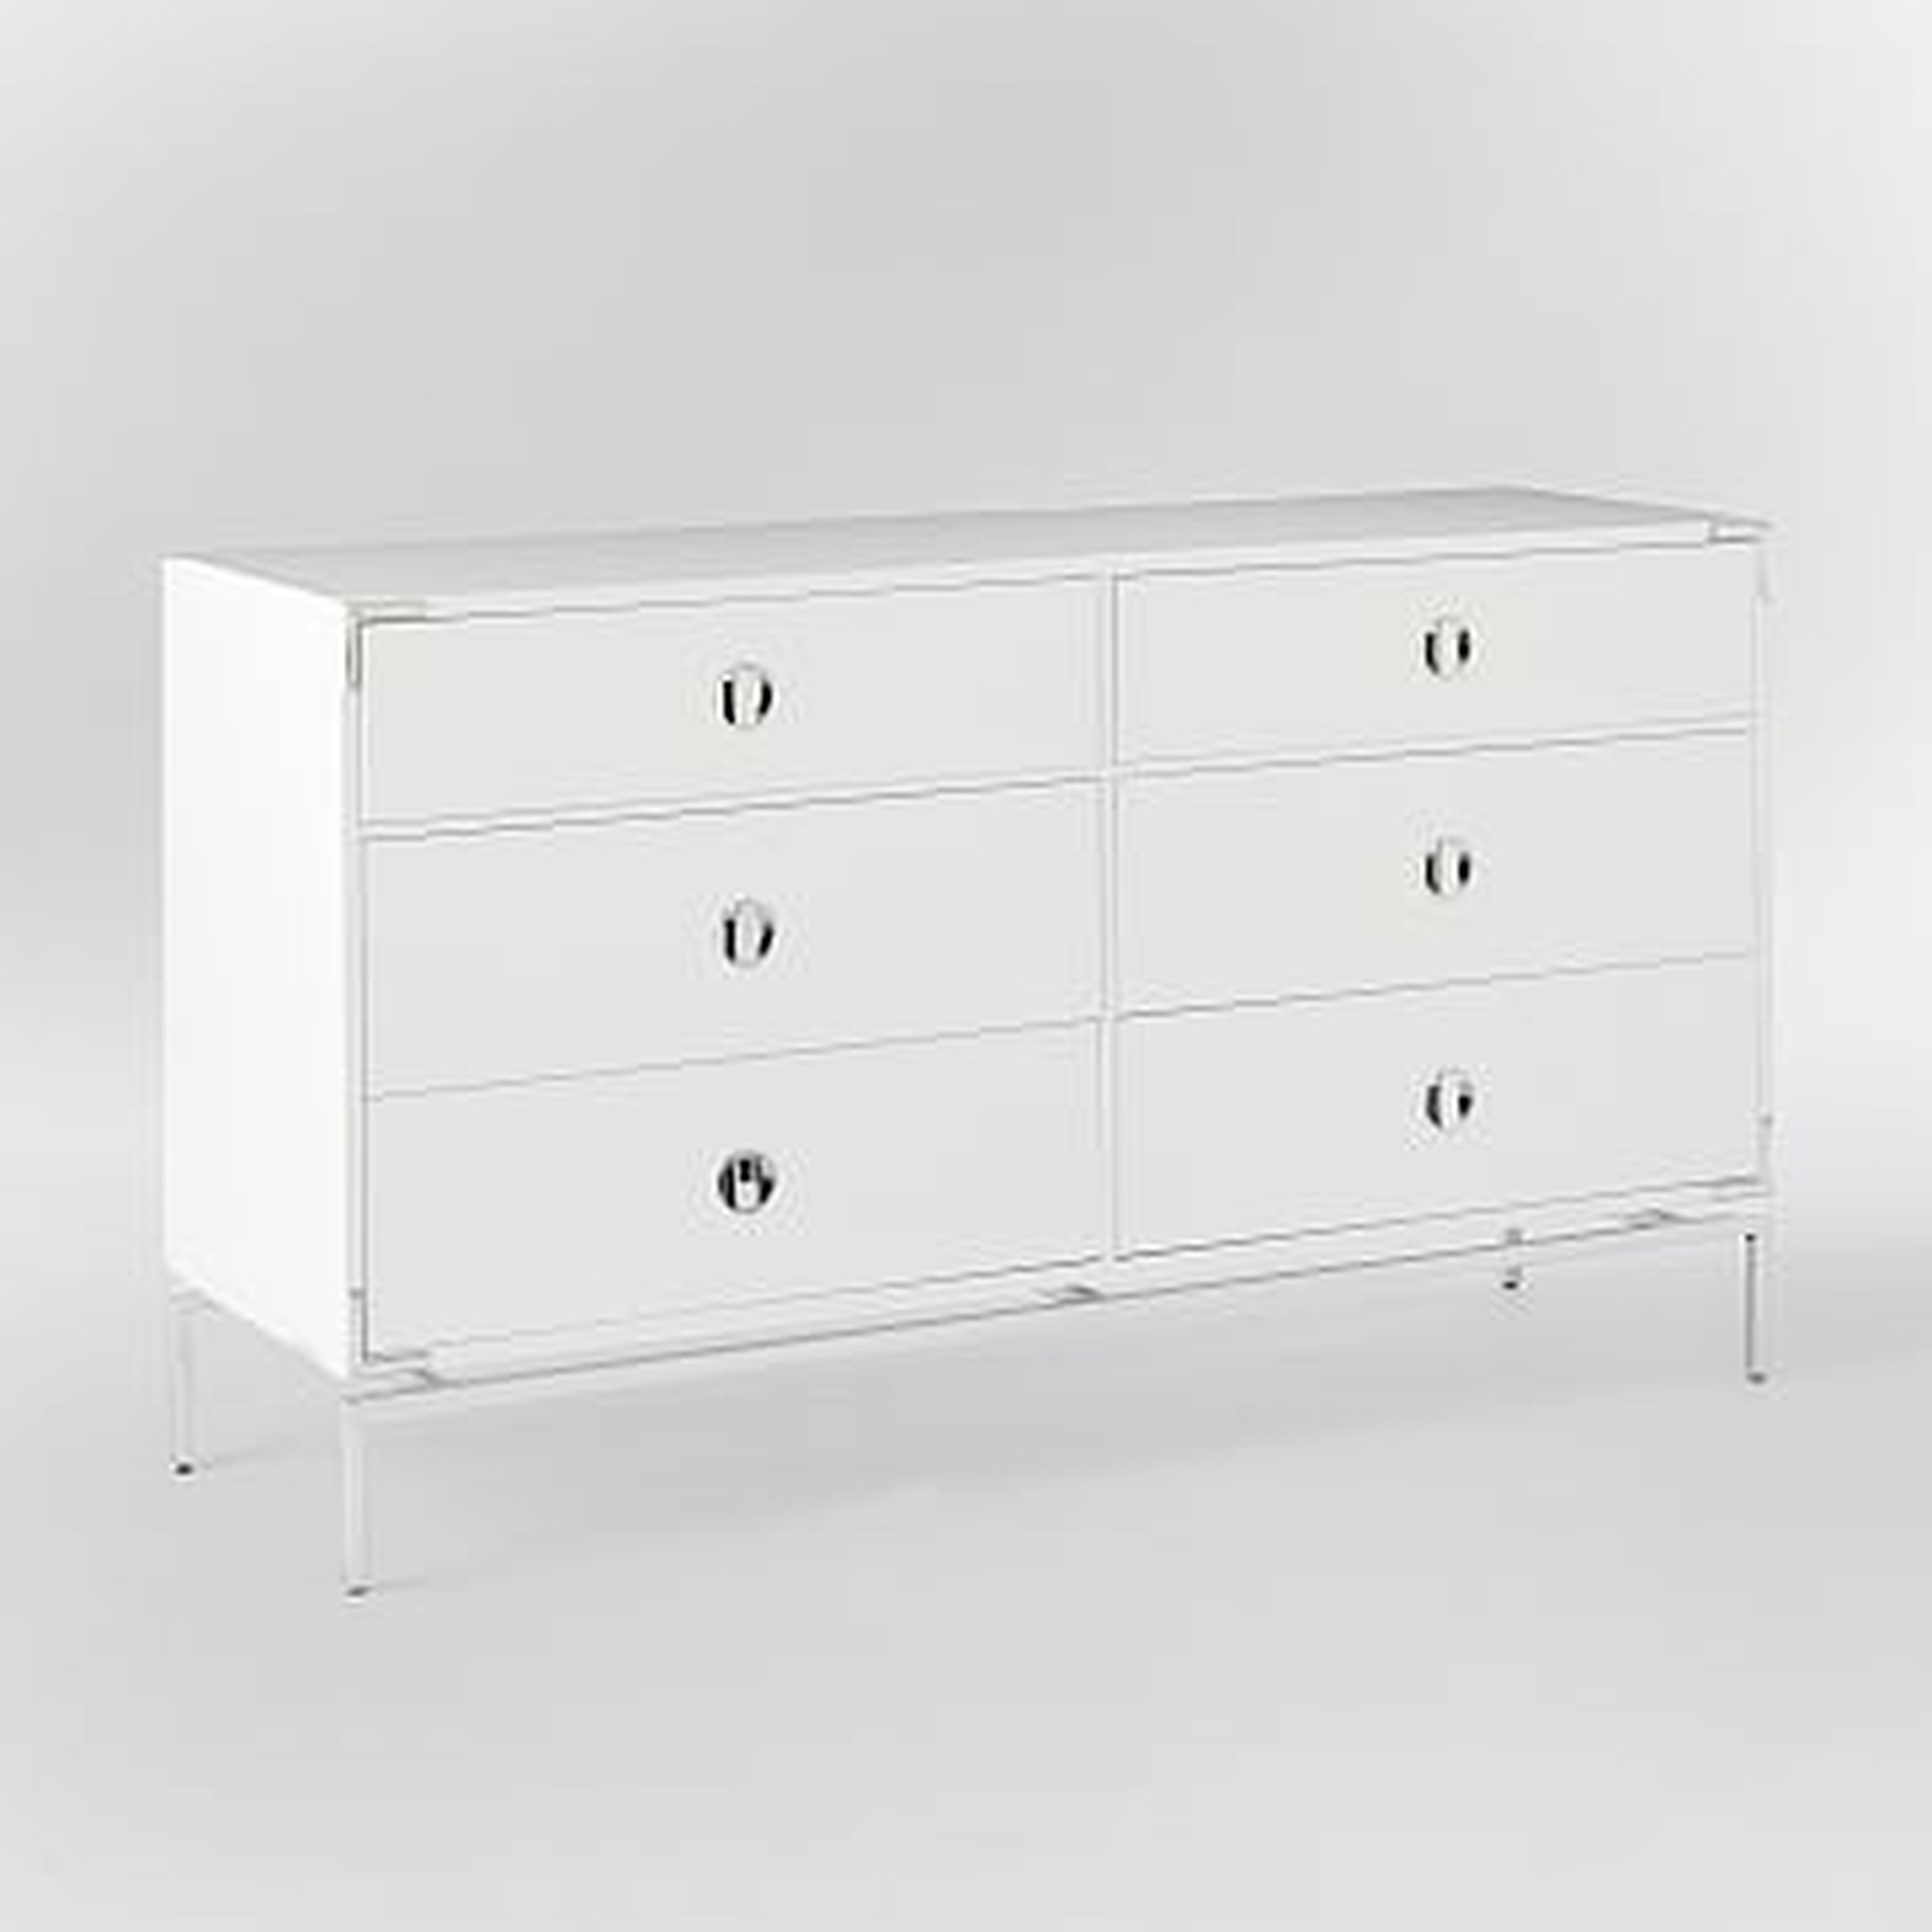 Malone Campaign Storage 6-Drawer Dresser, White Lacquer - West Elm